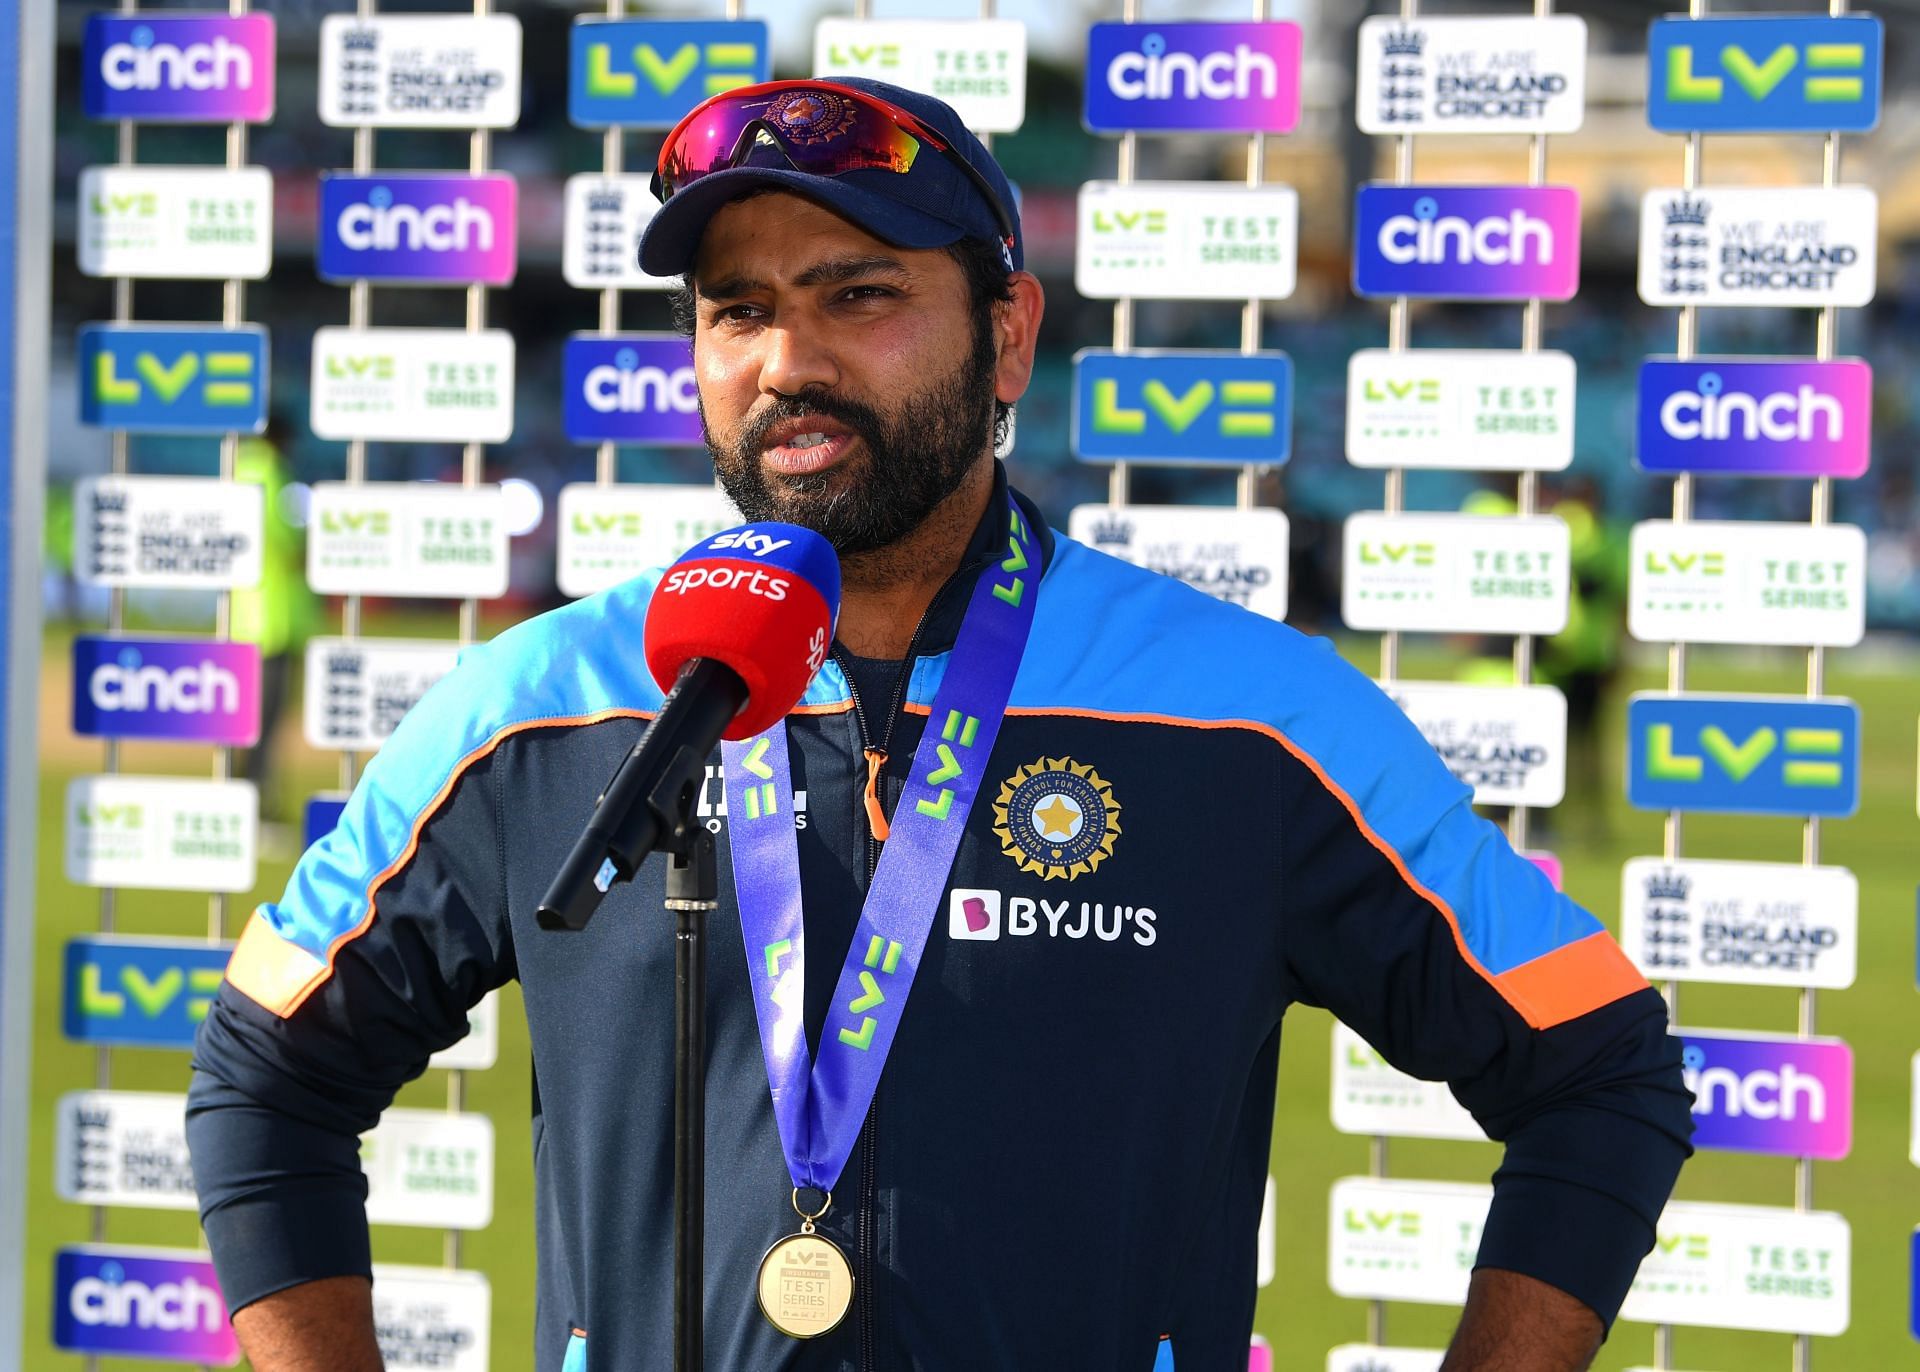 Rohit Sharma will be leading Team India for the first time in Test cricket